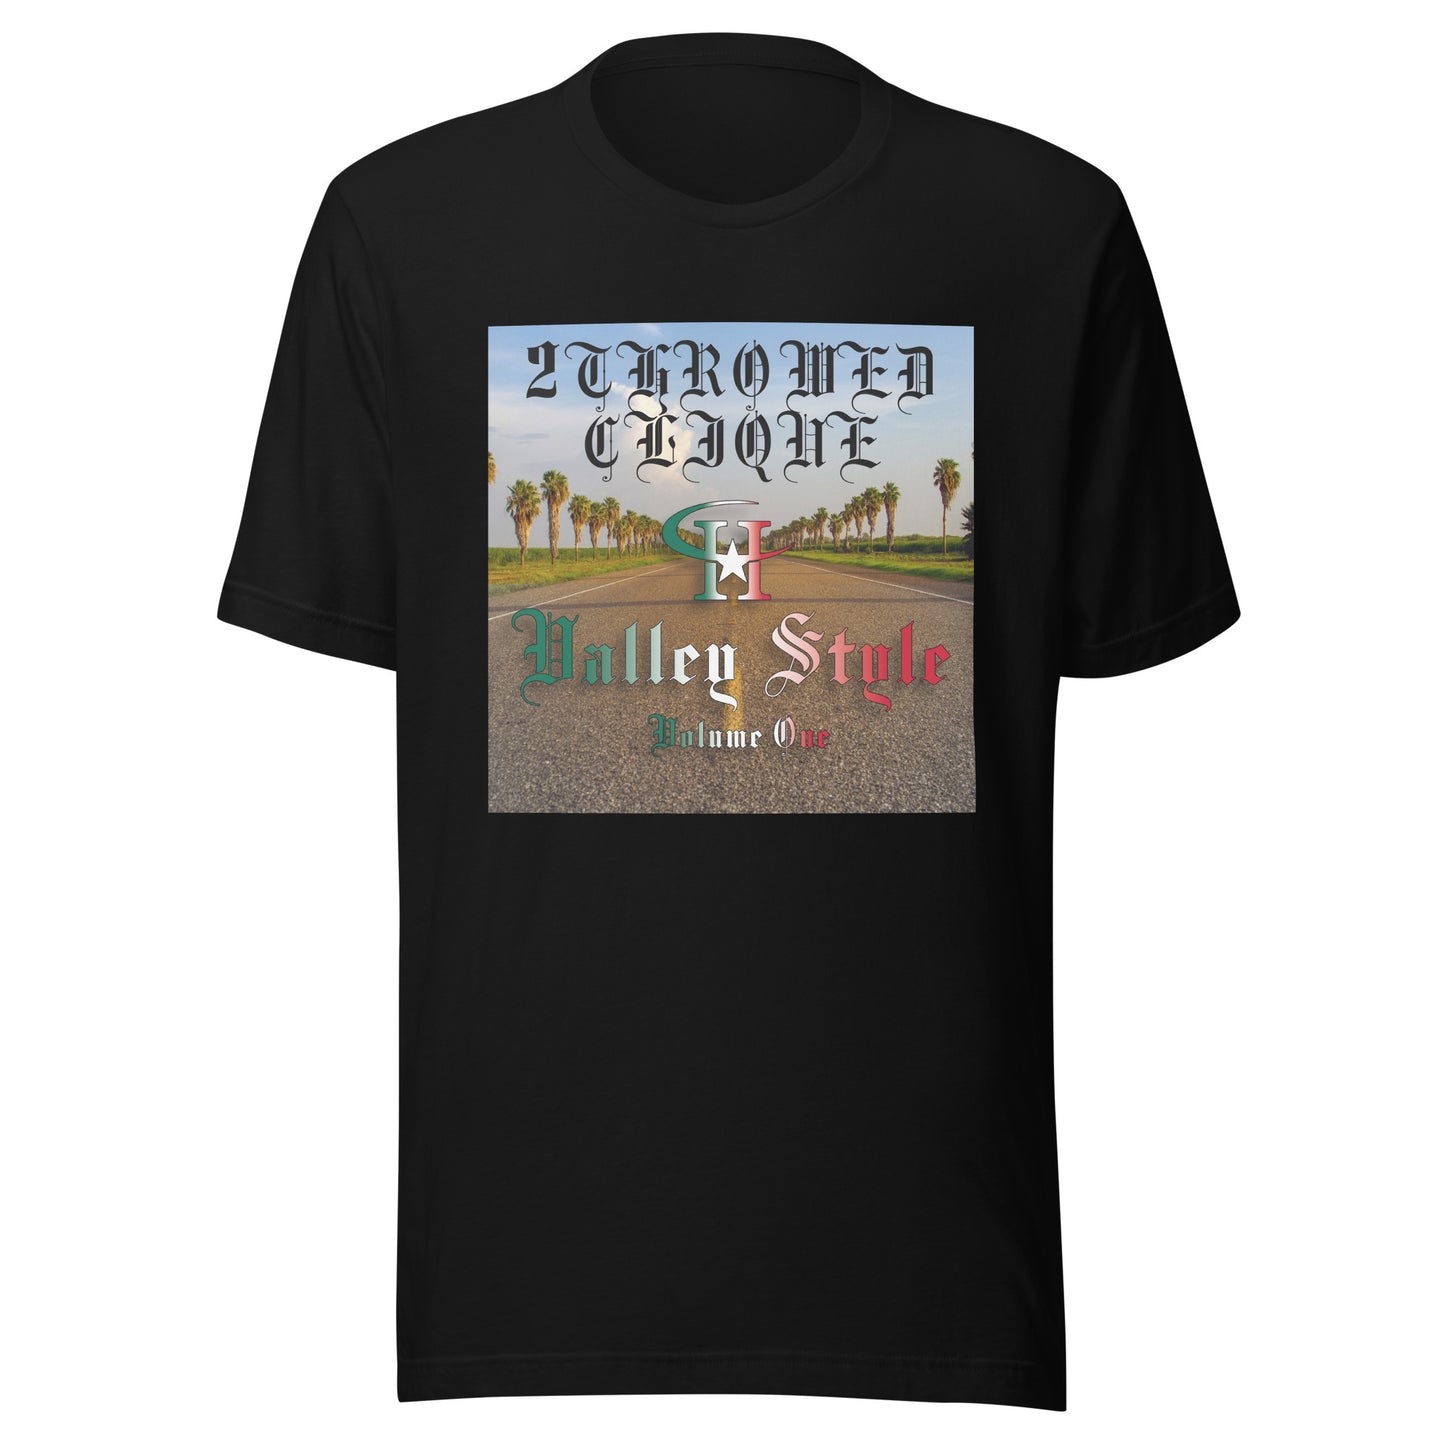 2 Throwed Clique - Valley Style Vol. 1 T-Shirt